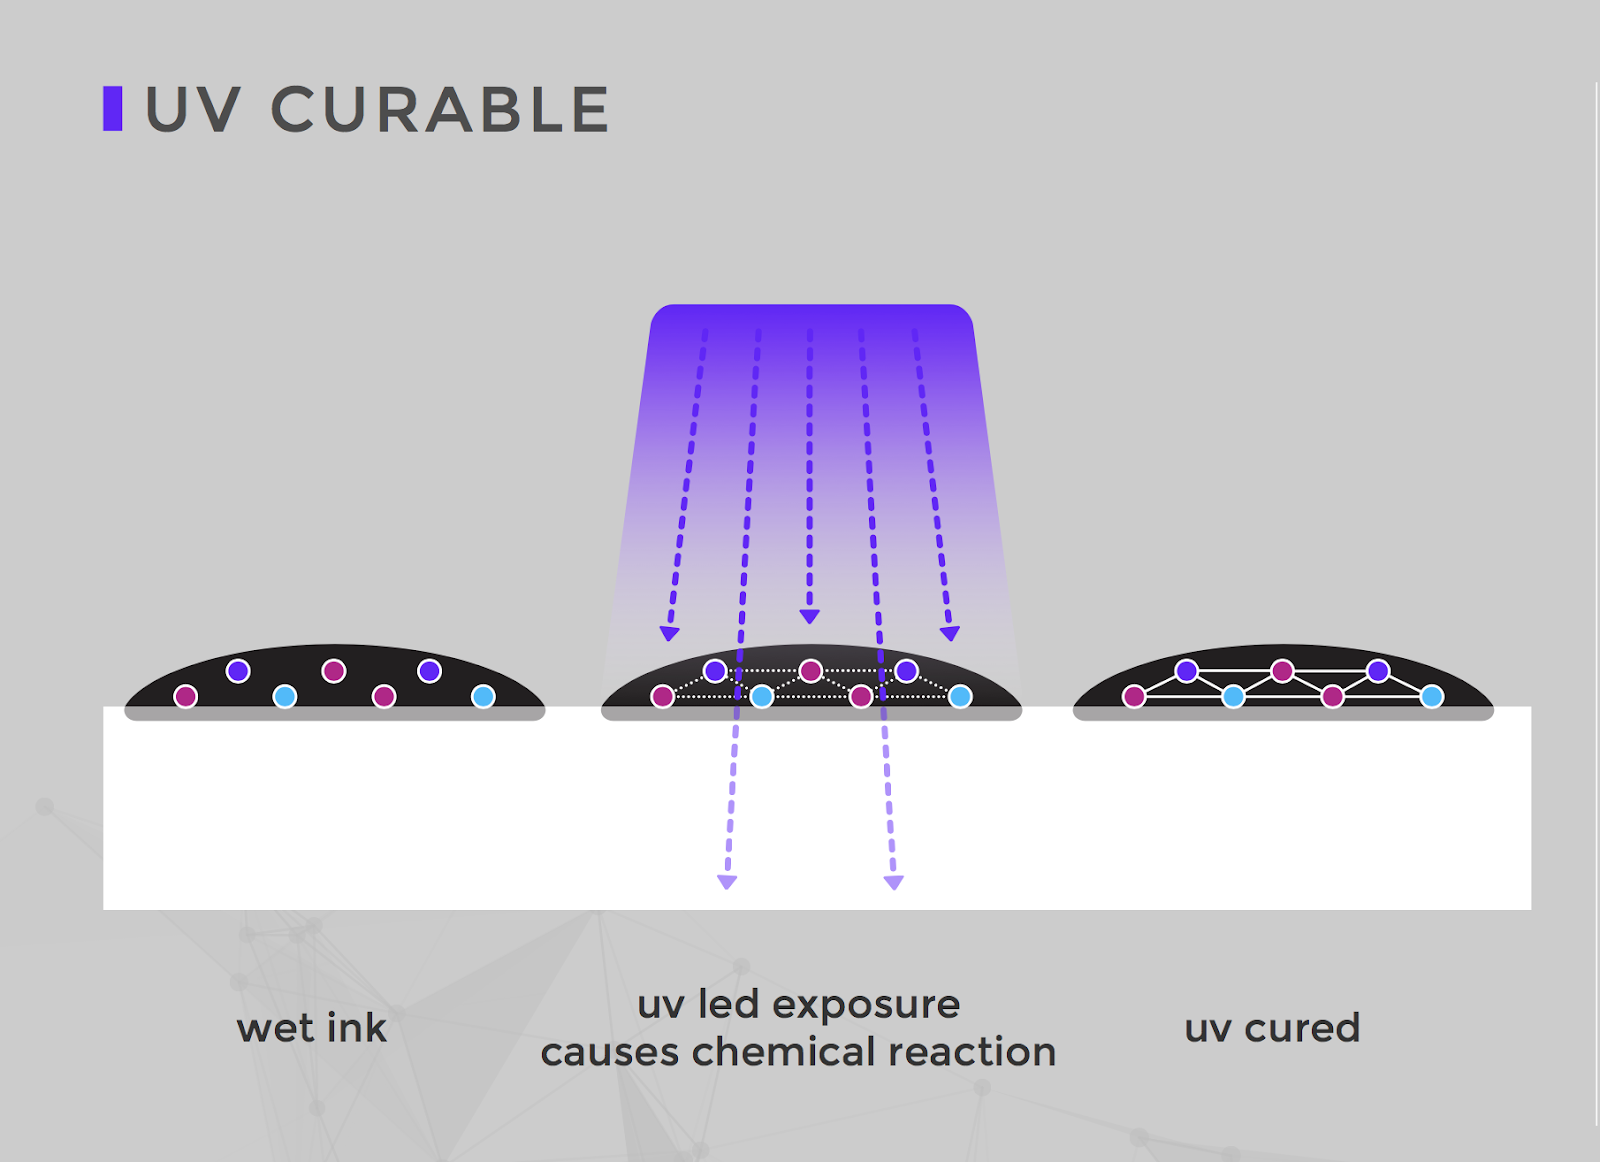 An illustration of how uv curable ink works